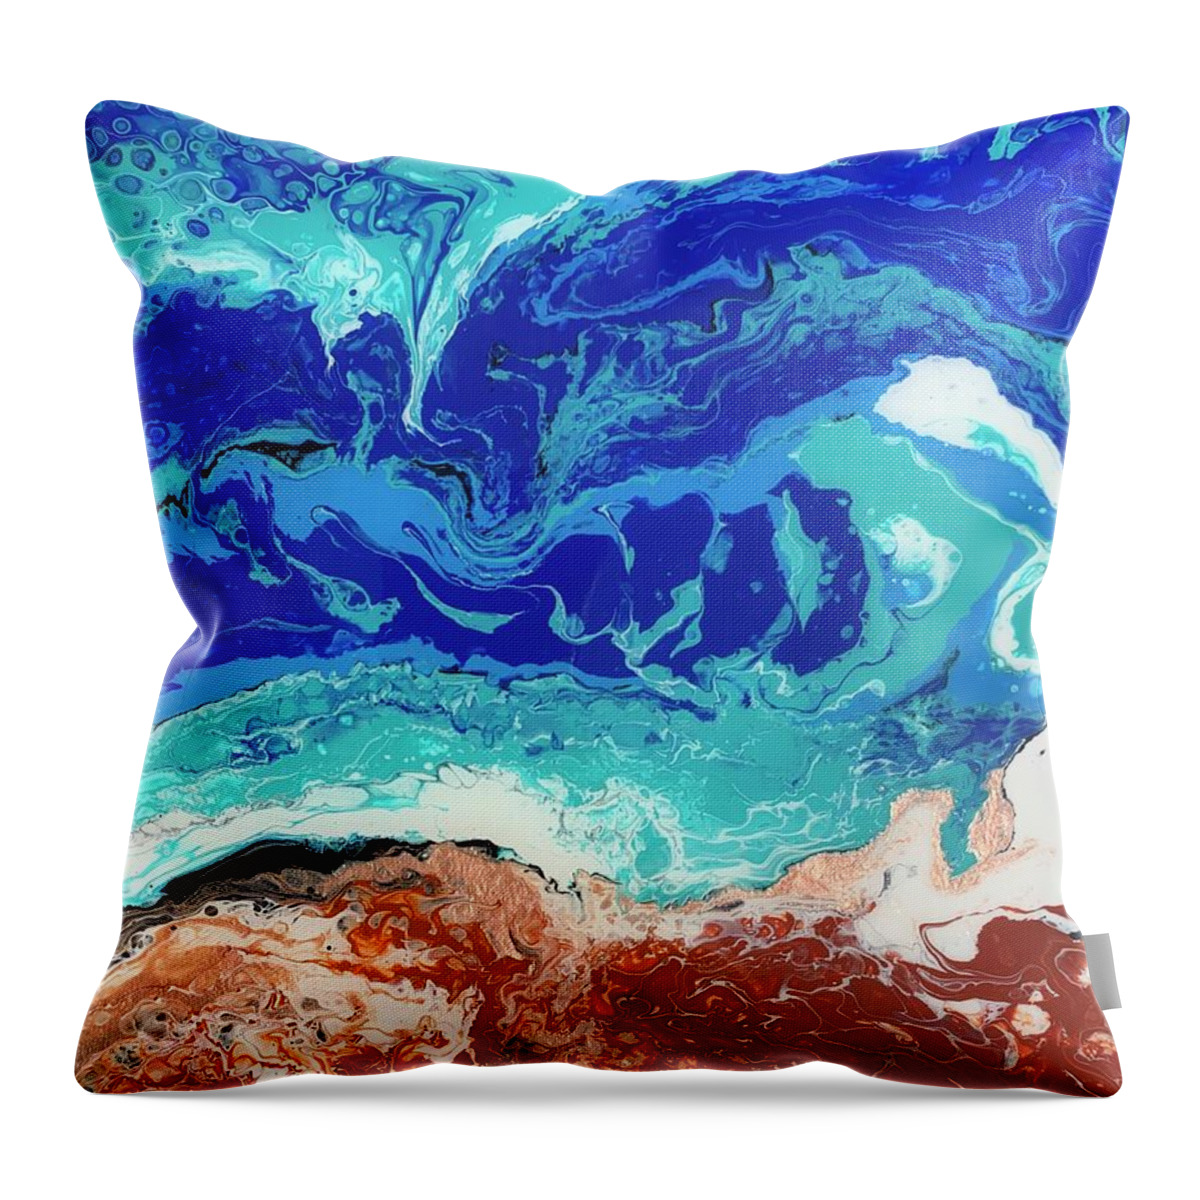 Ocean Throw Pillow featuring the painting Crash by Nicole DiCicco